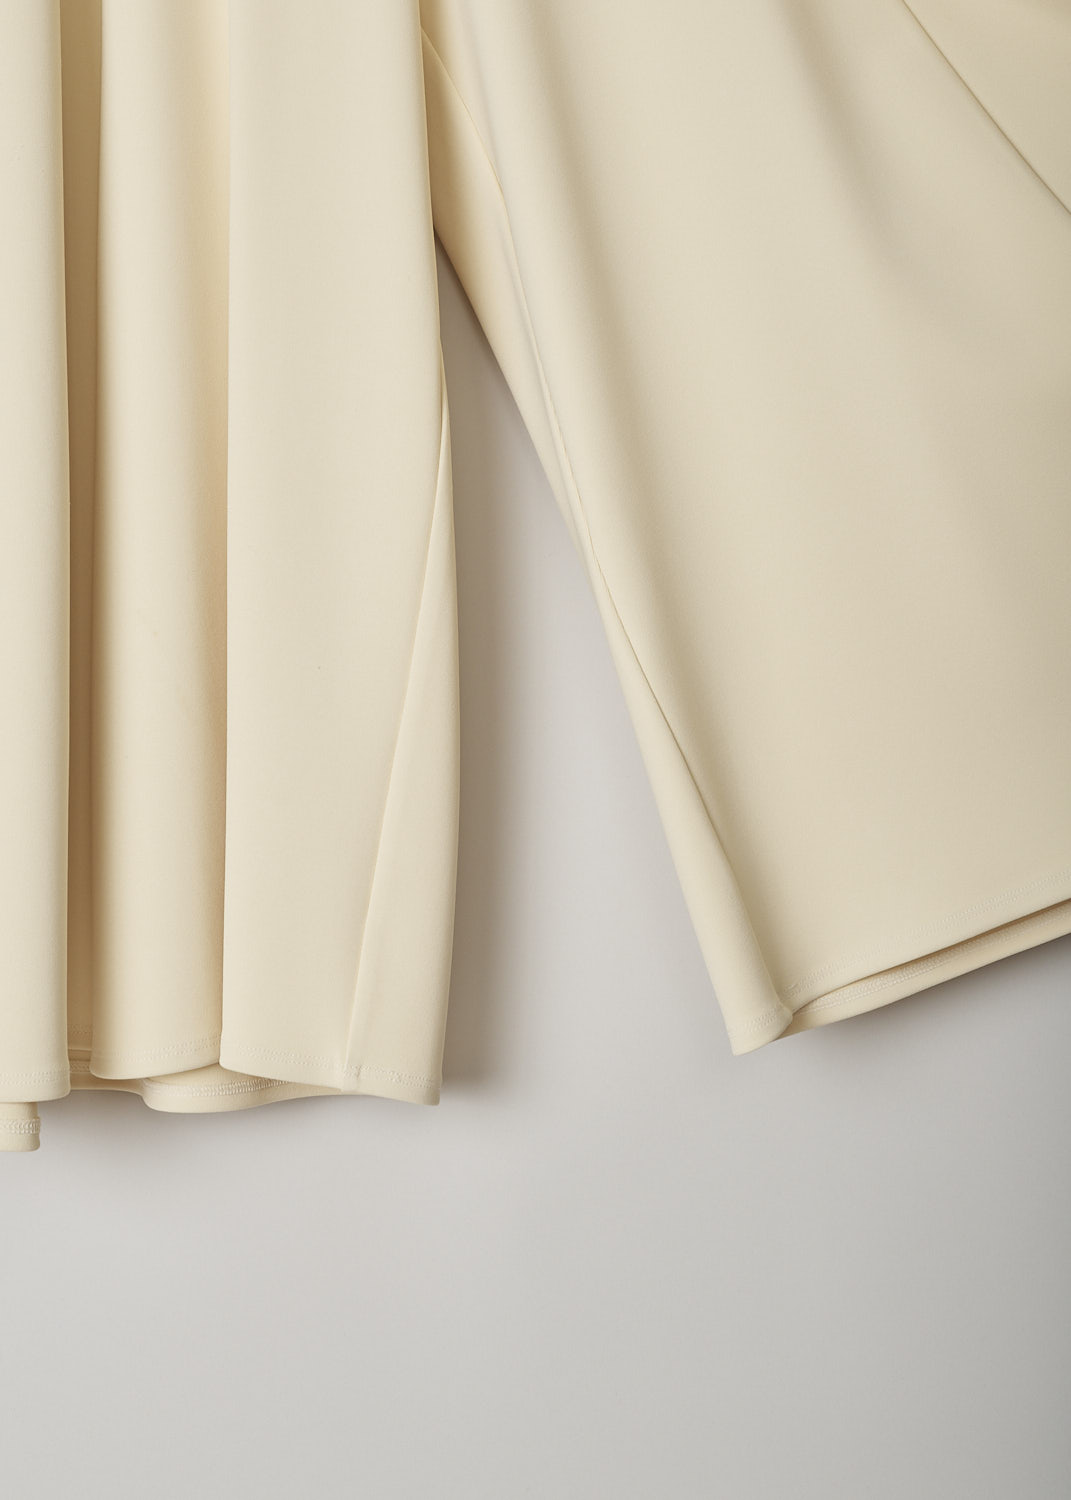 THE ROW, LIGHT CREAM MILDRO PANTS, MILDRO_PANTS_3995K31_3_LIGHT_CREAM, Beige, Detail, These Light Cream high-waisted culotte pants are elasticated throughout with a broad elasticated waistband. These pants have cropped flared pants legs.
